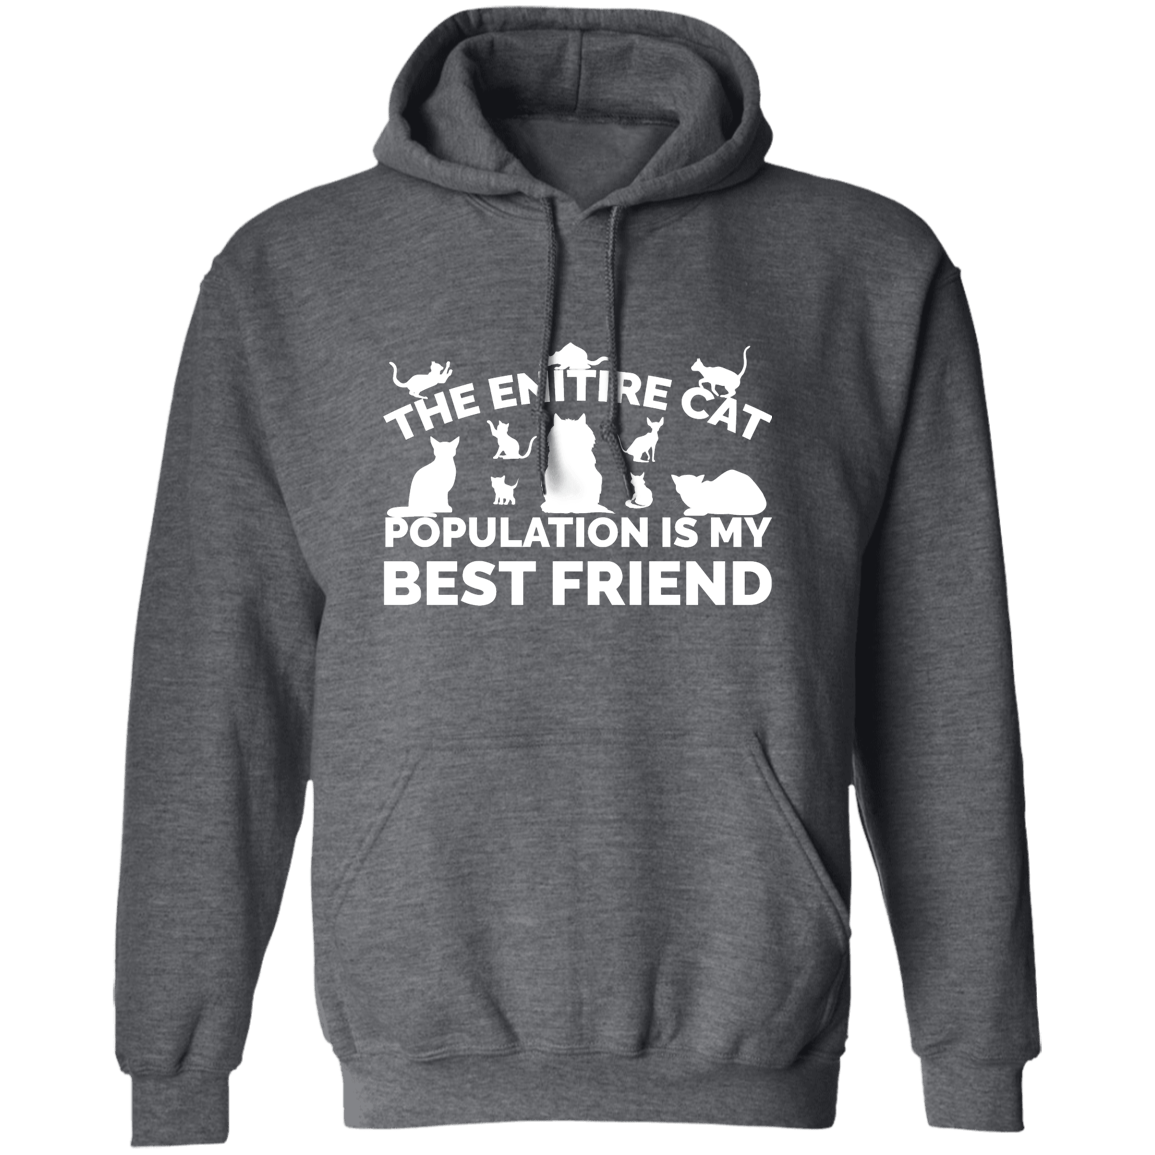 The Entire Cat Population - Hoodie.